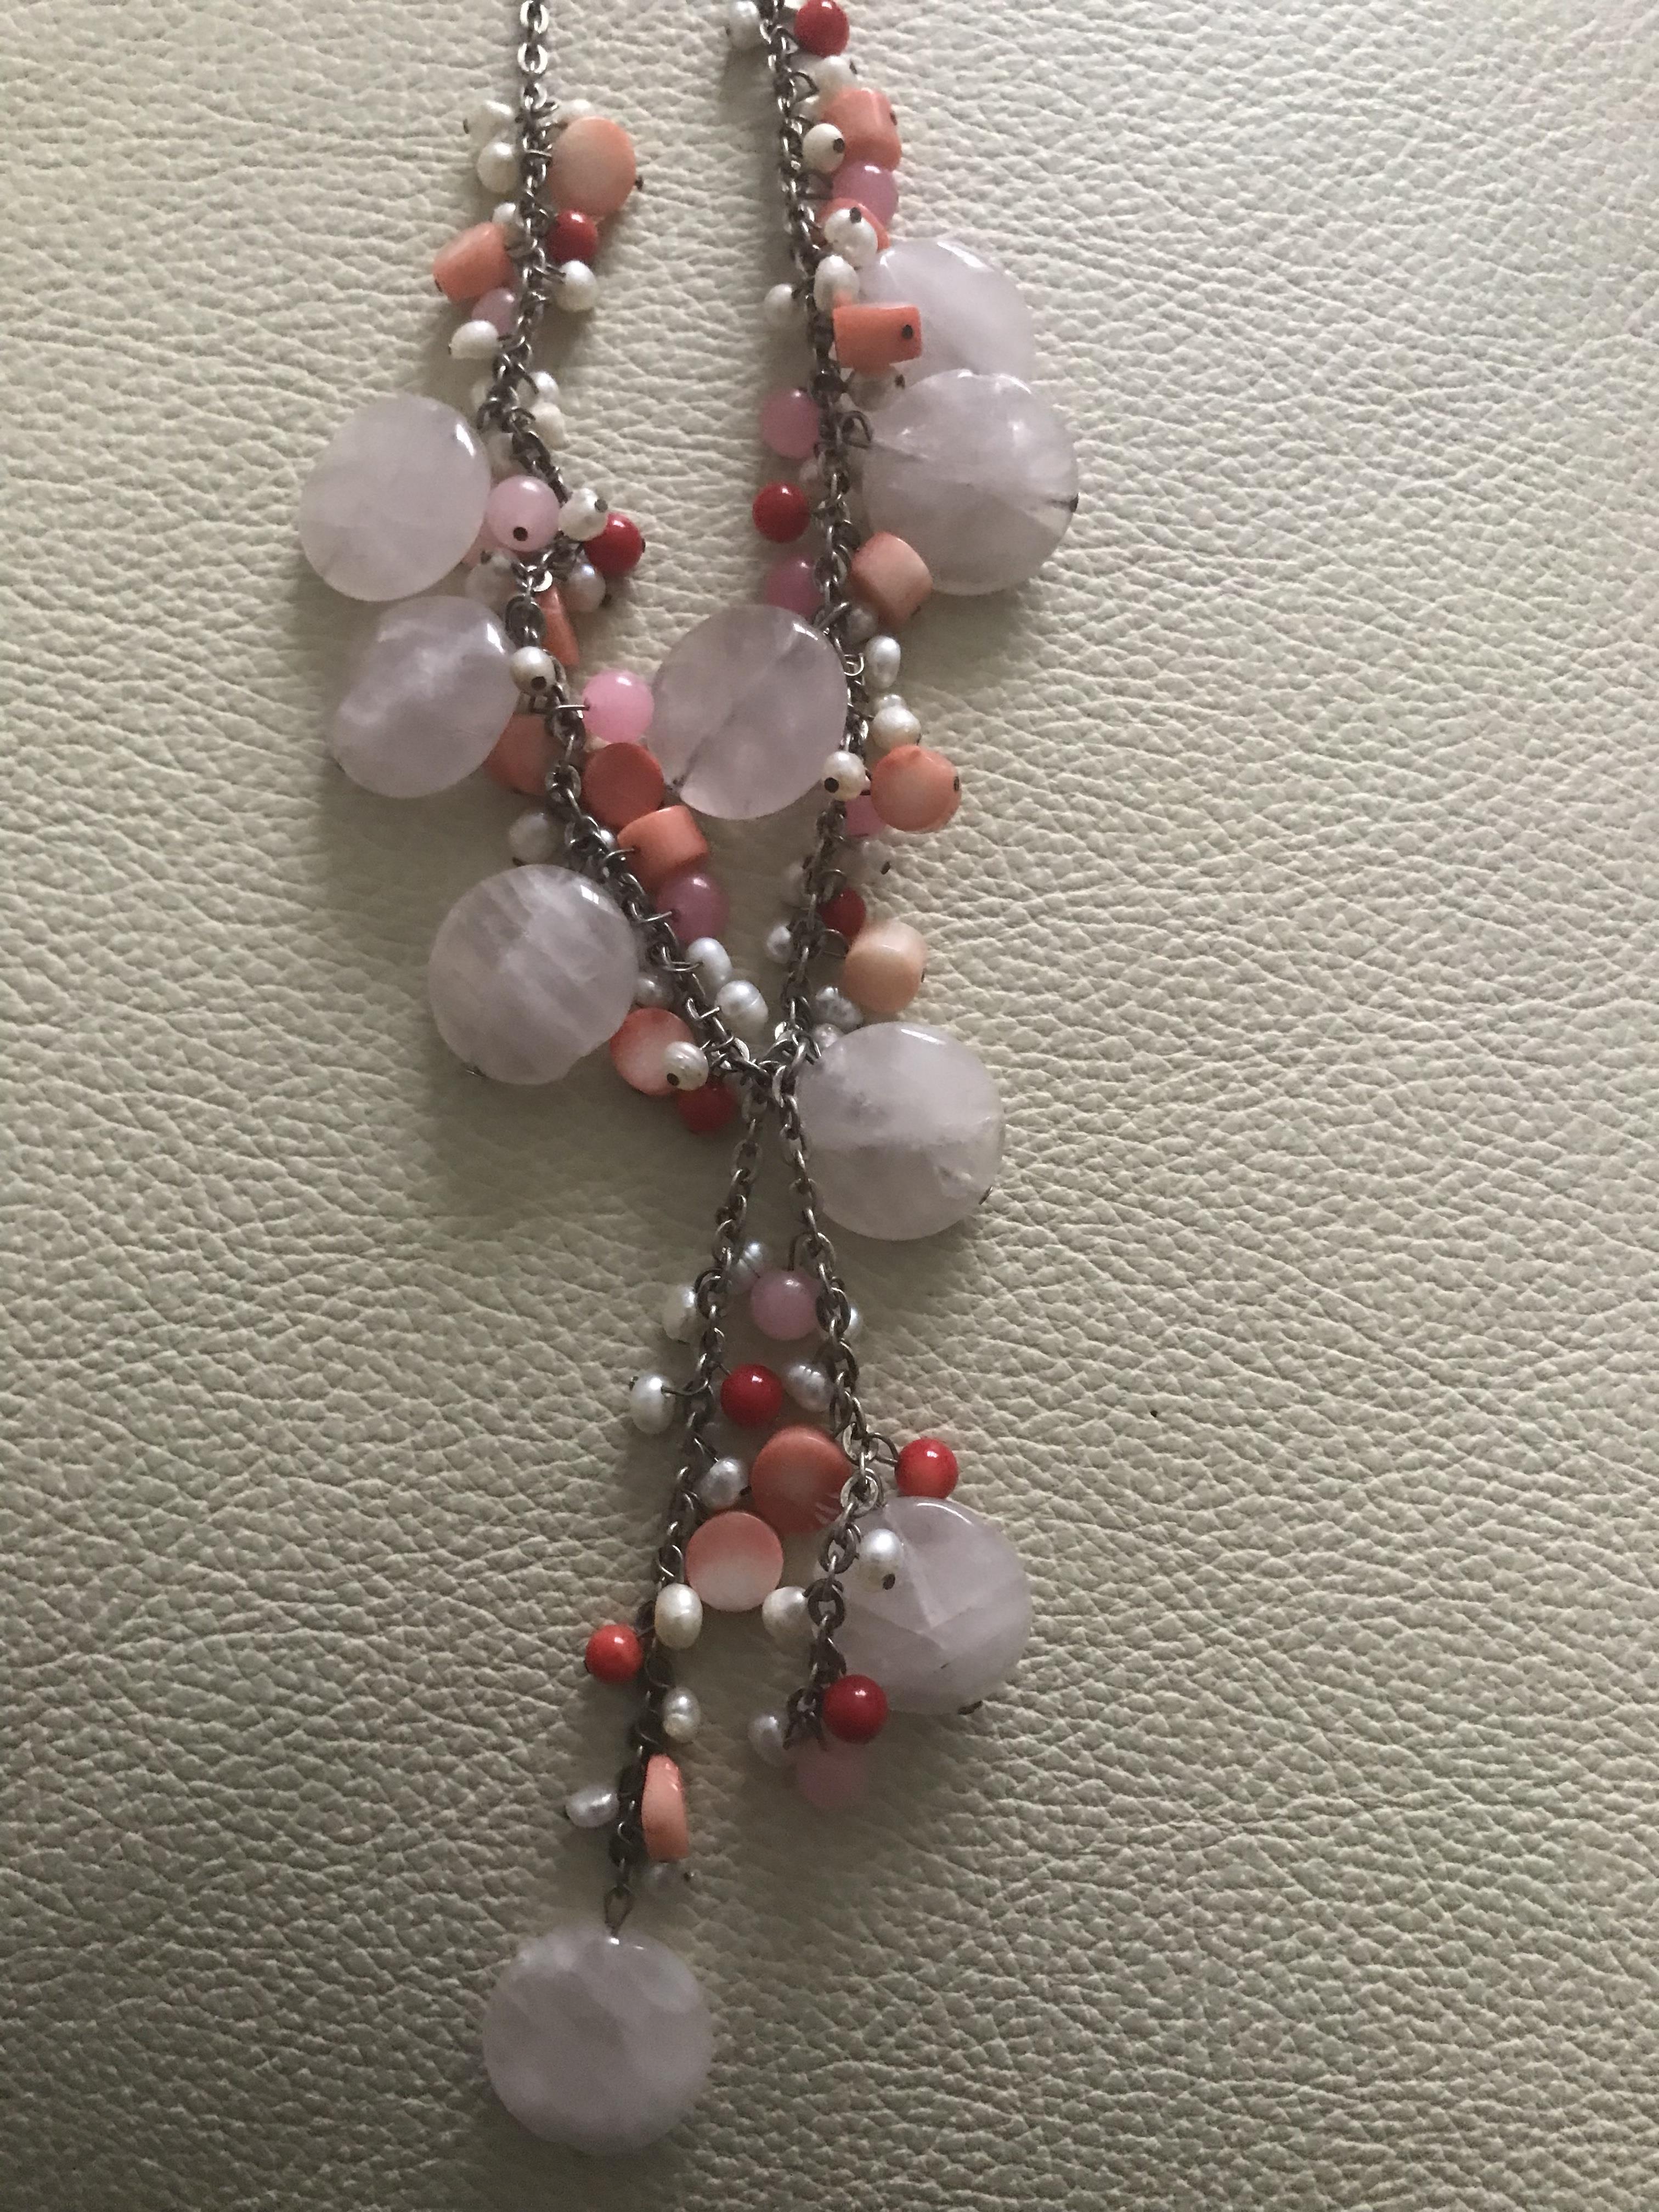 Butler & Wilson Rose Quartz, Pearl and Coral Bead Necklace - Image 4 of 5